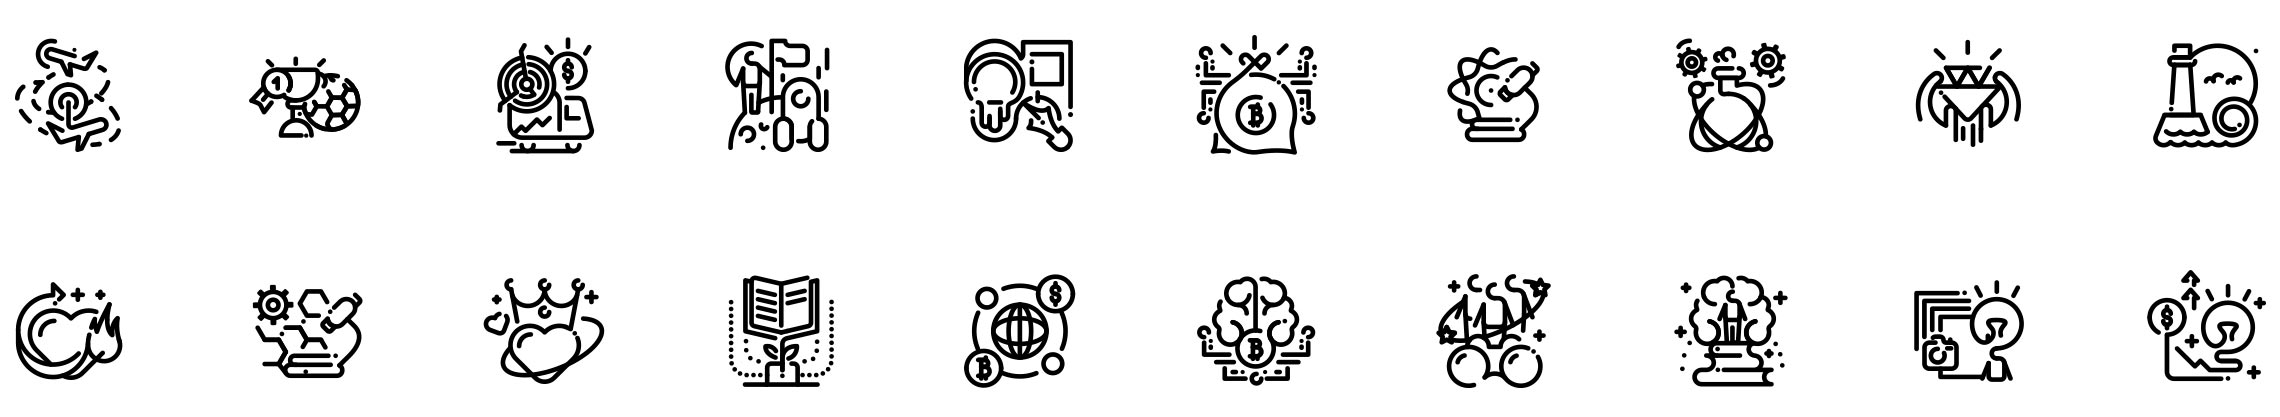 mixed-icons-icons-set-preview